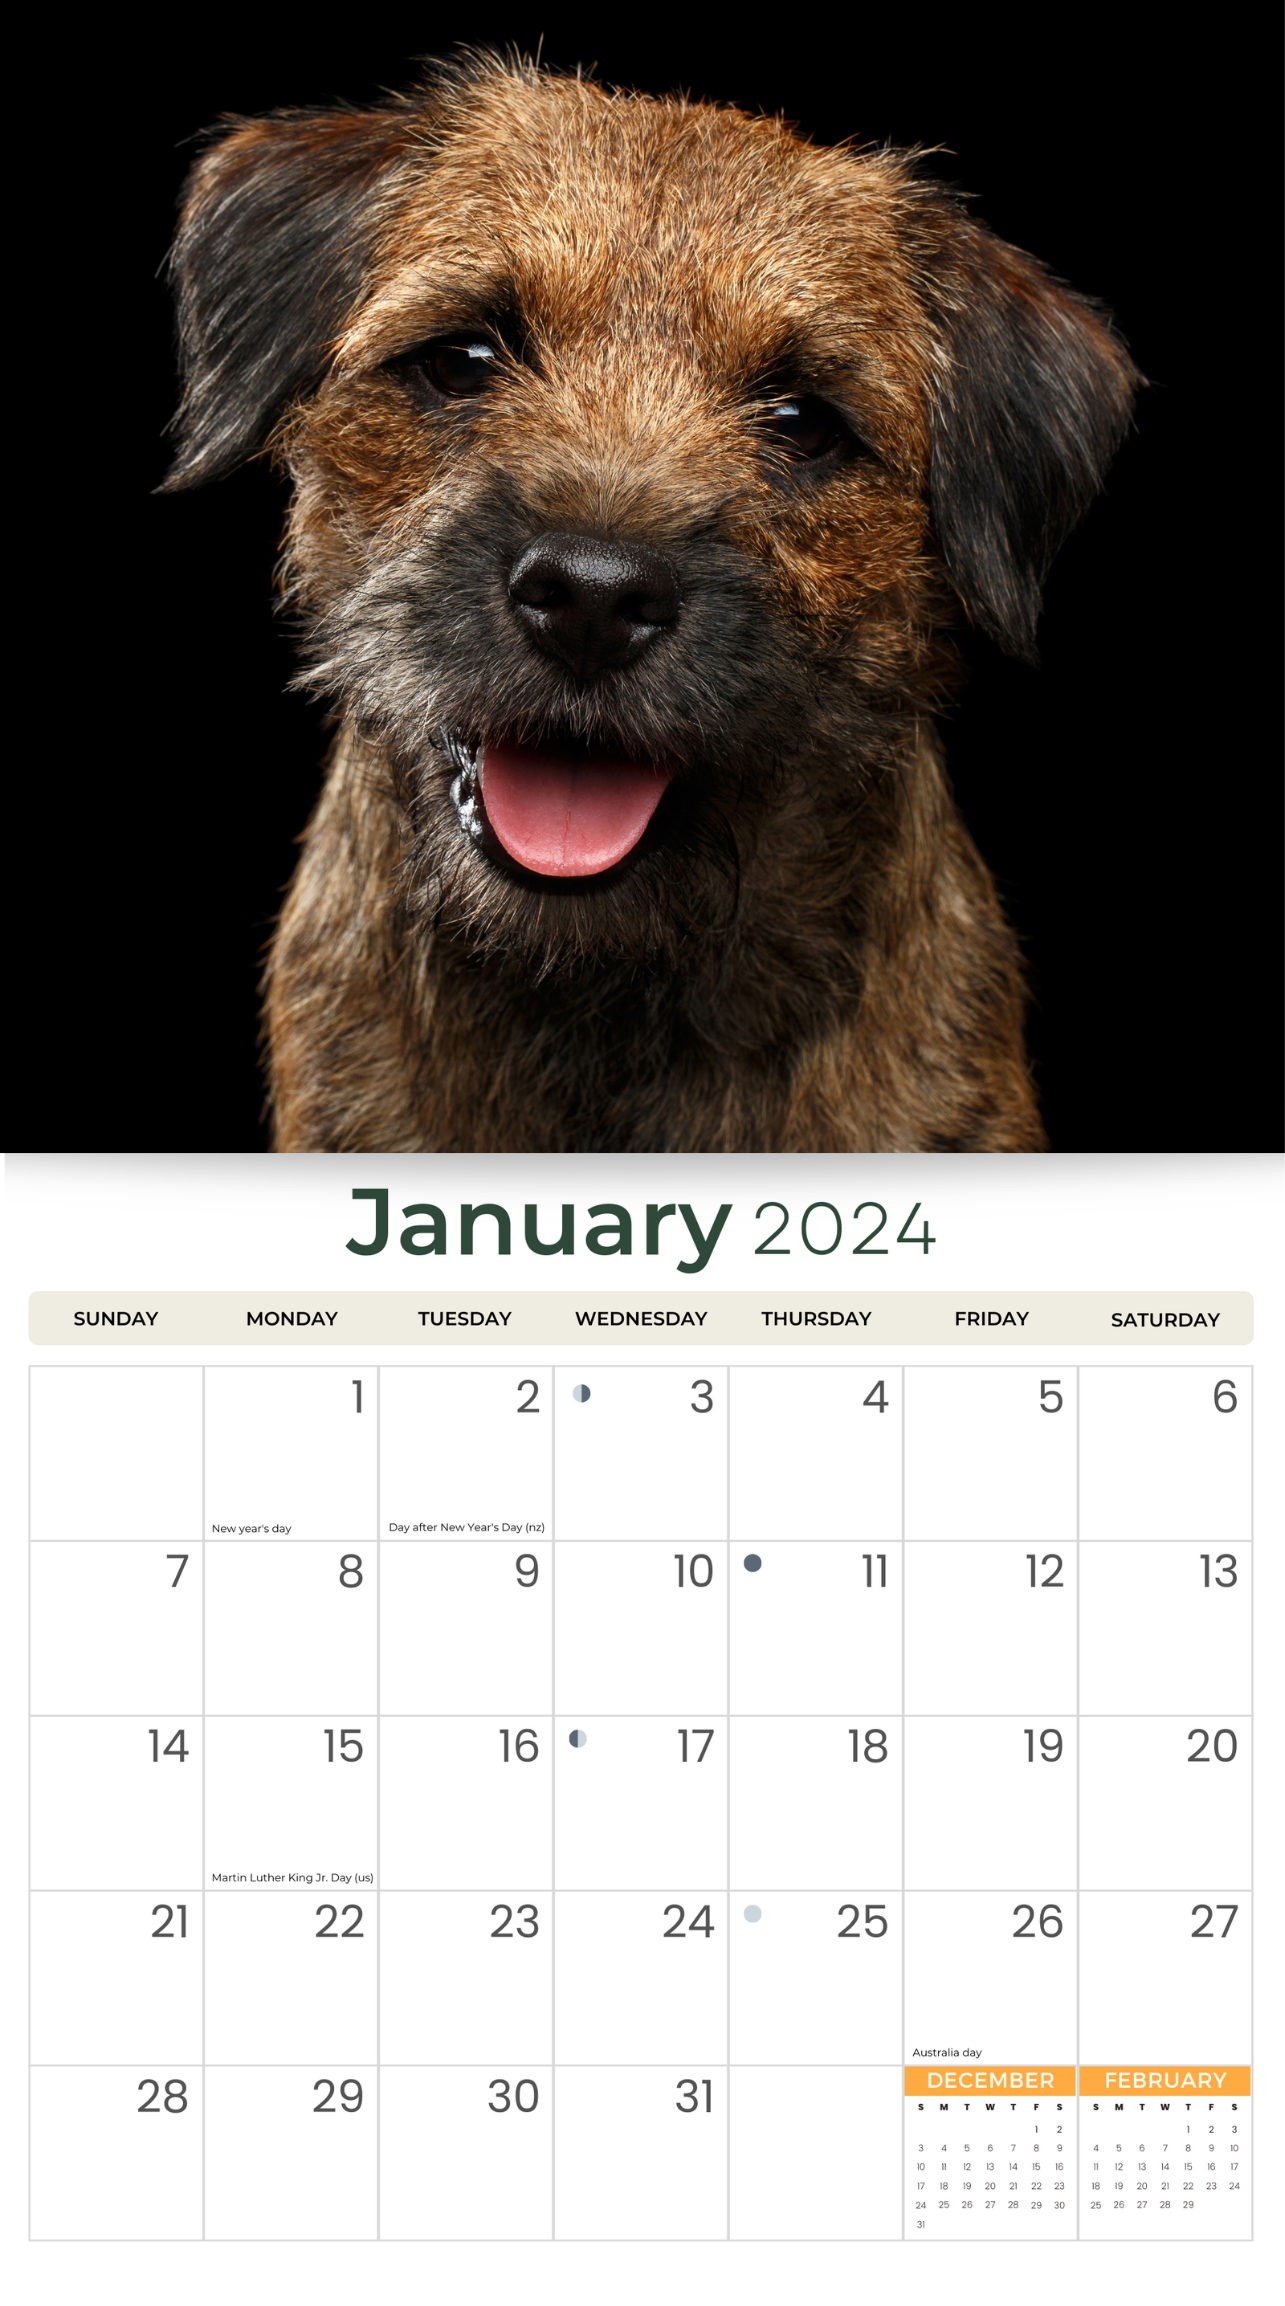 2024 Border Terriers Dogs & Puppies - Deluxe Wall Calendar by Just Calendars - 16 Month - Plastic Free